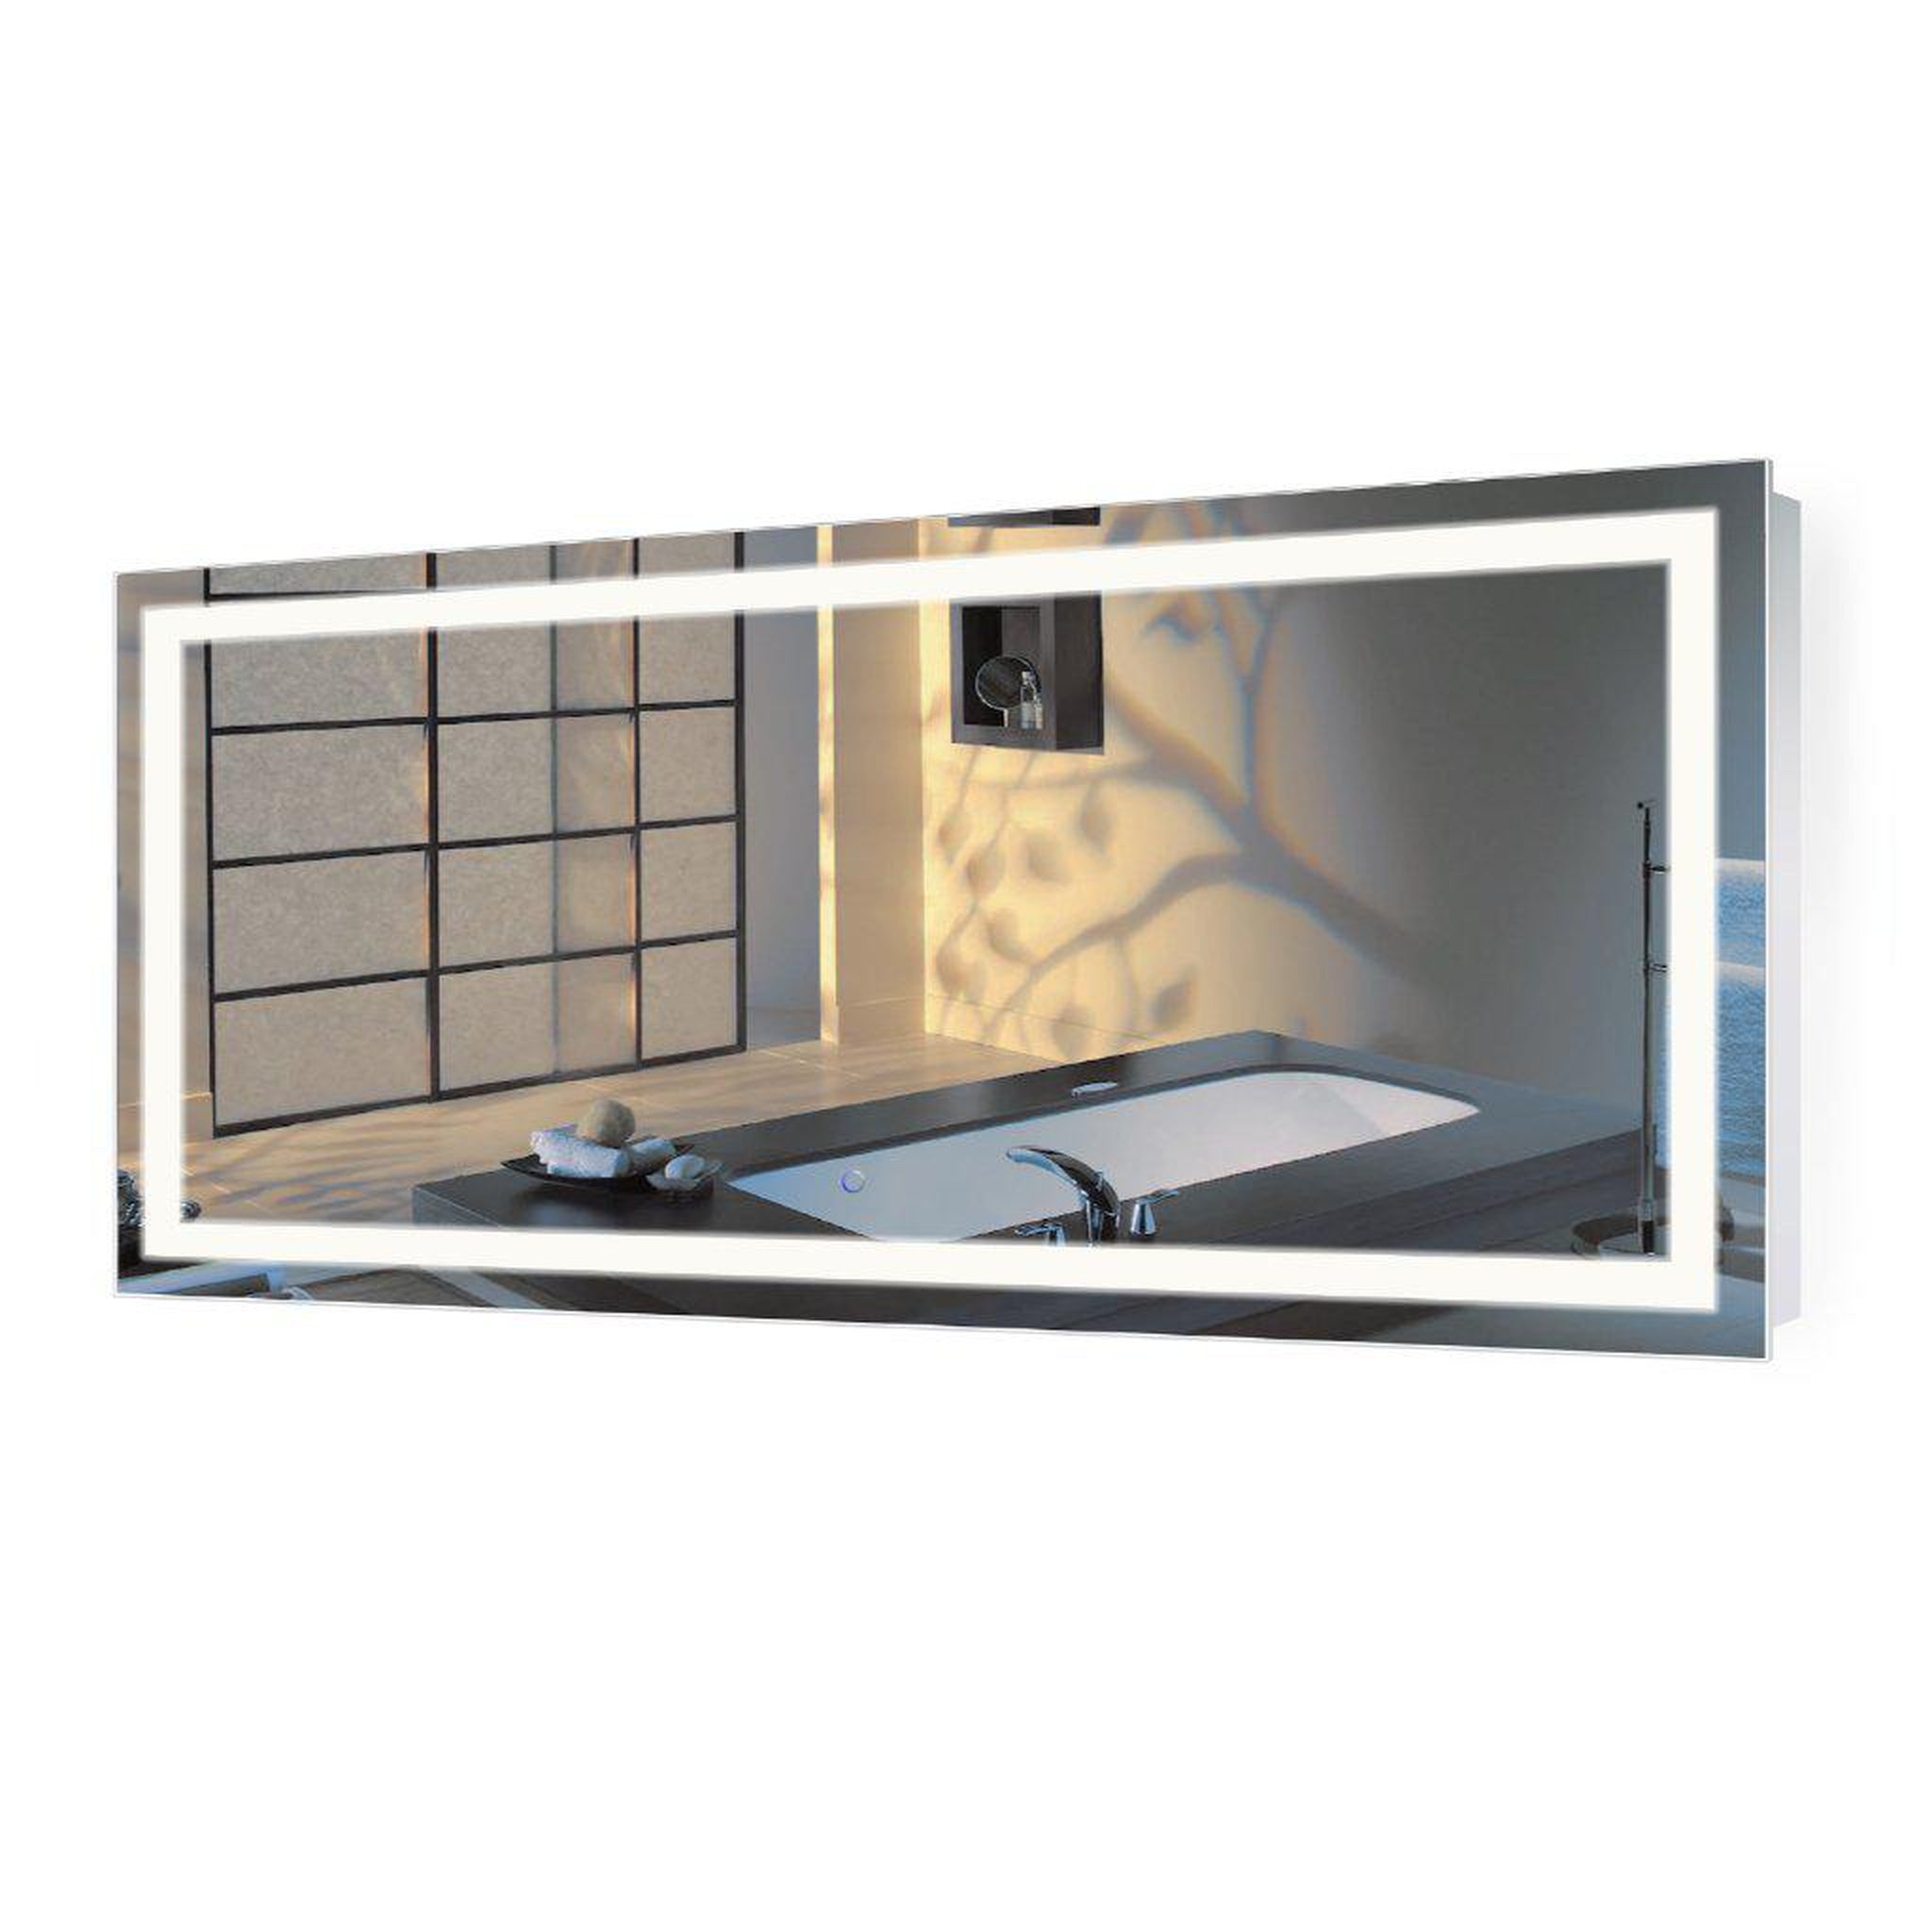 Krugg Reflections, Krugg Reflections Icon 60" x 30" 5000K Rectangular Wall-Mounted Illuminated Silver Backed LED Mirror With Built-in Defogger and Touch Sensor On/Off Built-in Dimmer